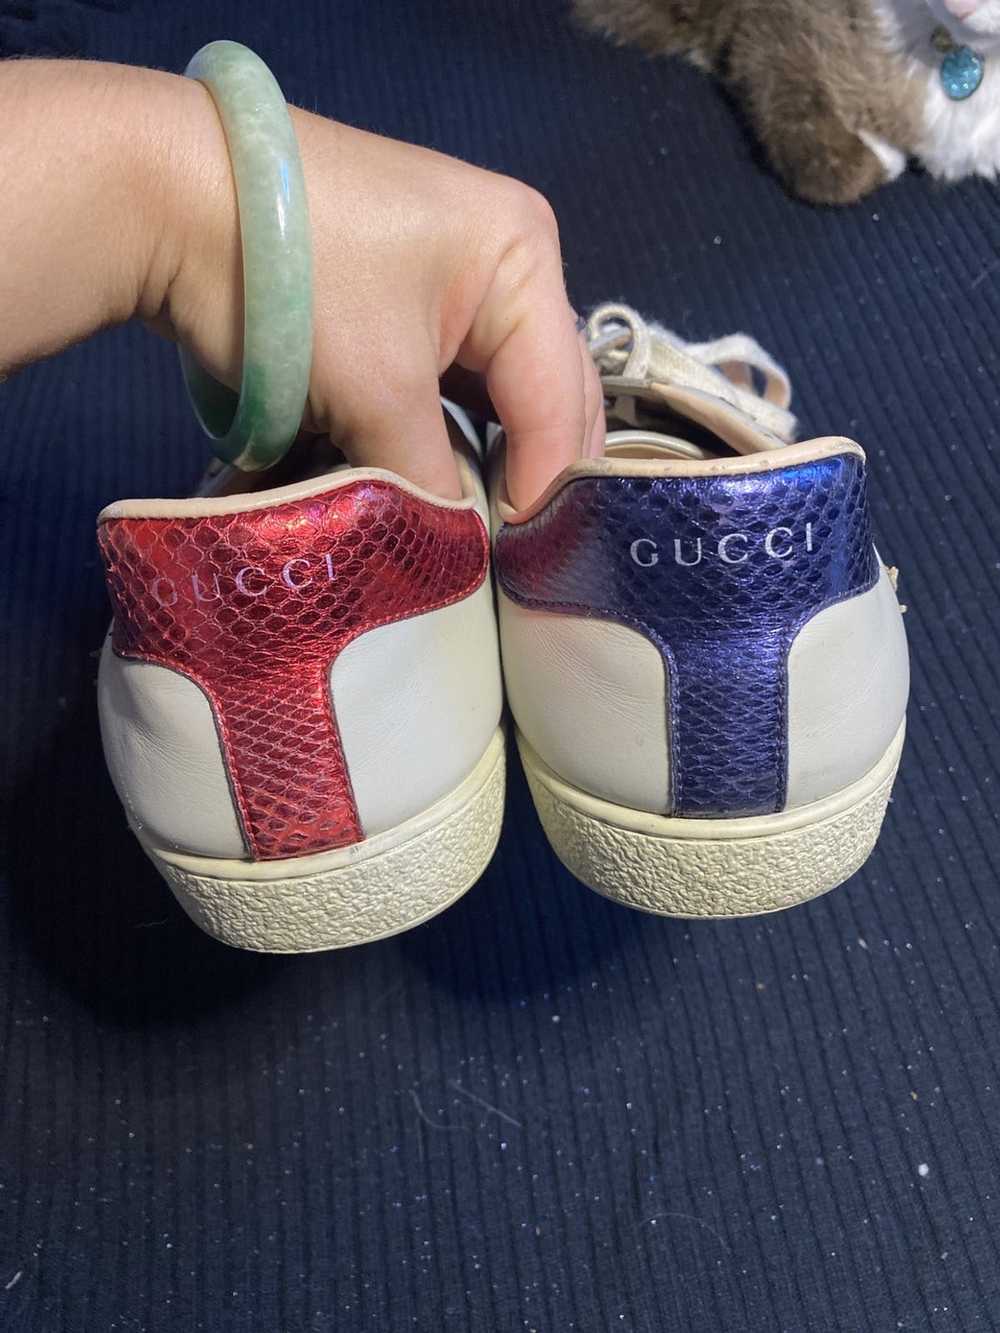 Gucci Gucci flame ace sneaker - image 2